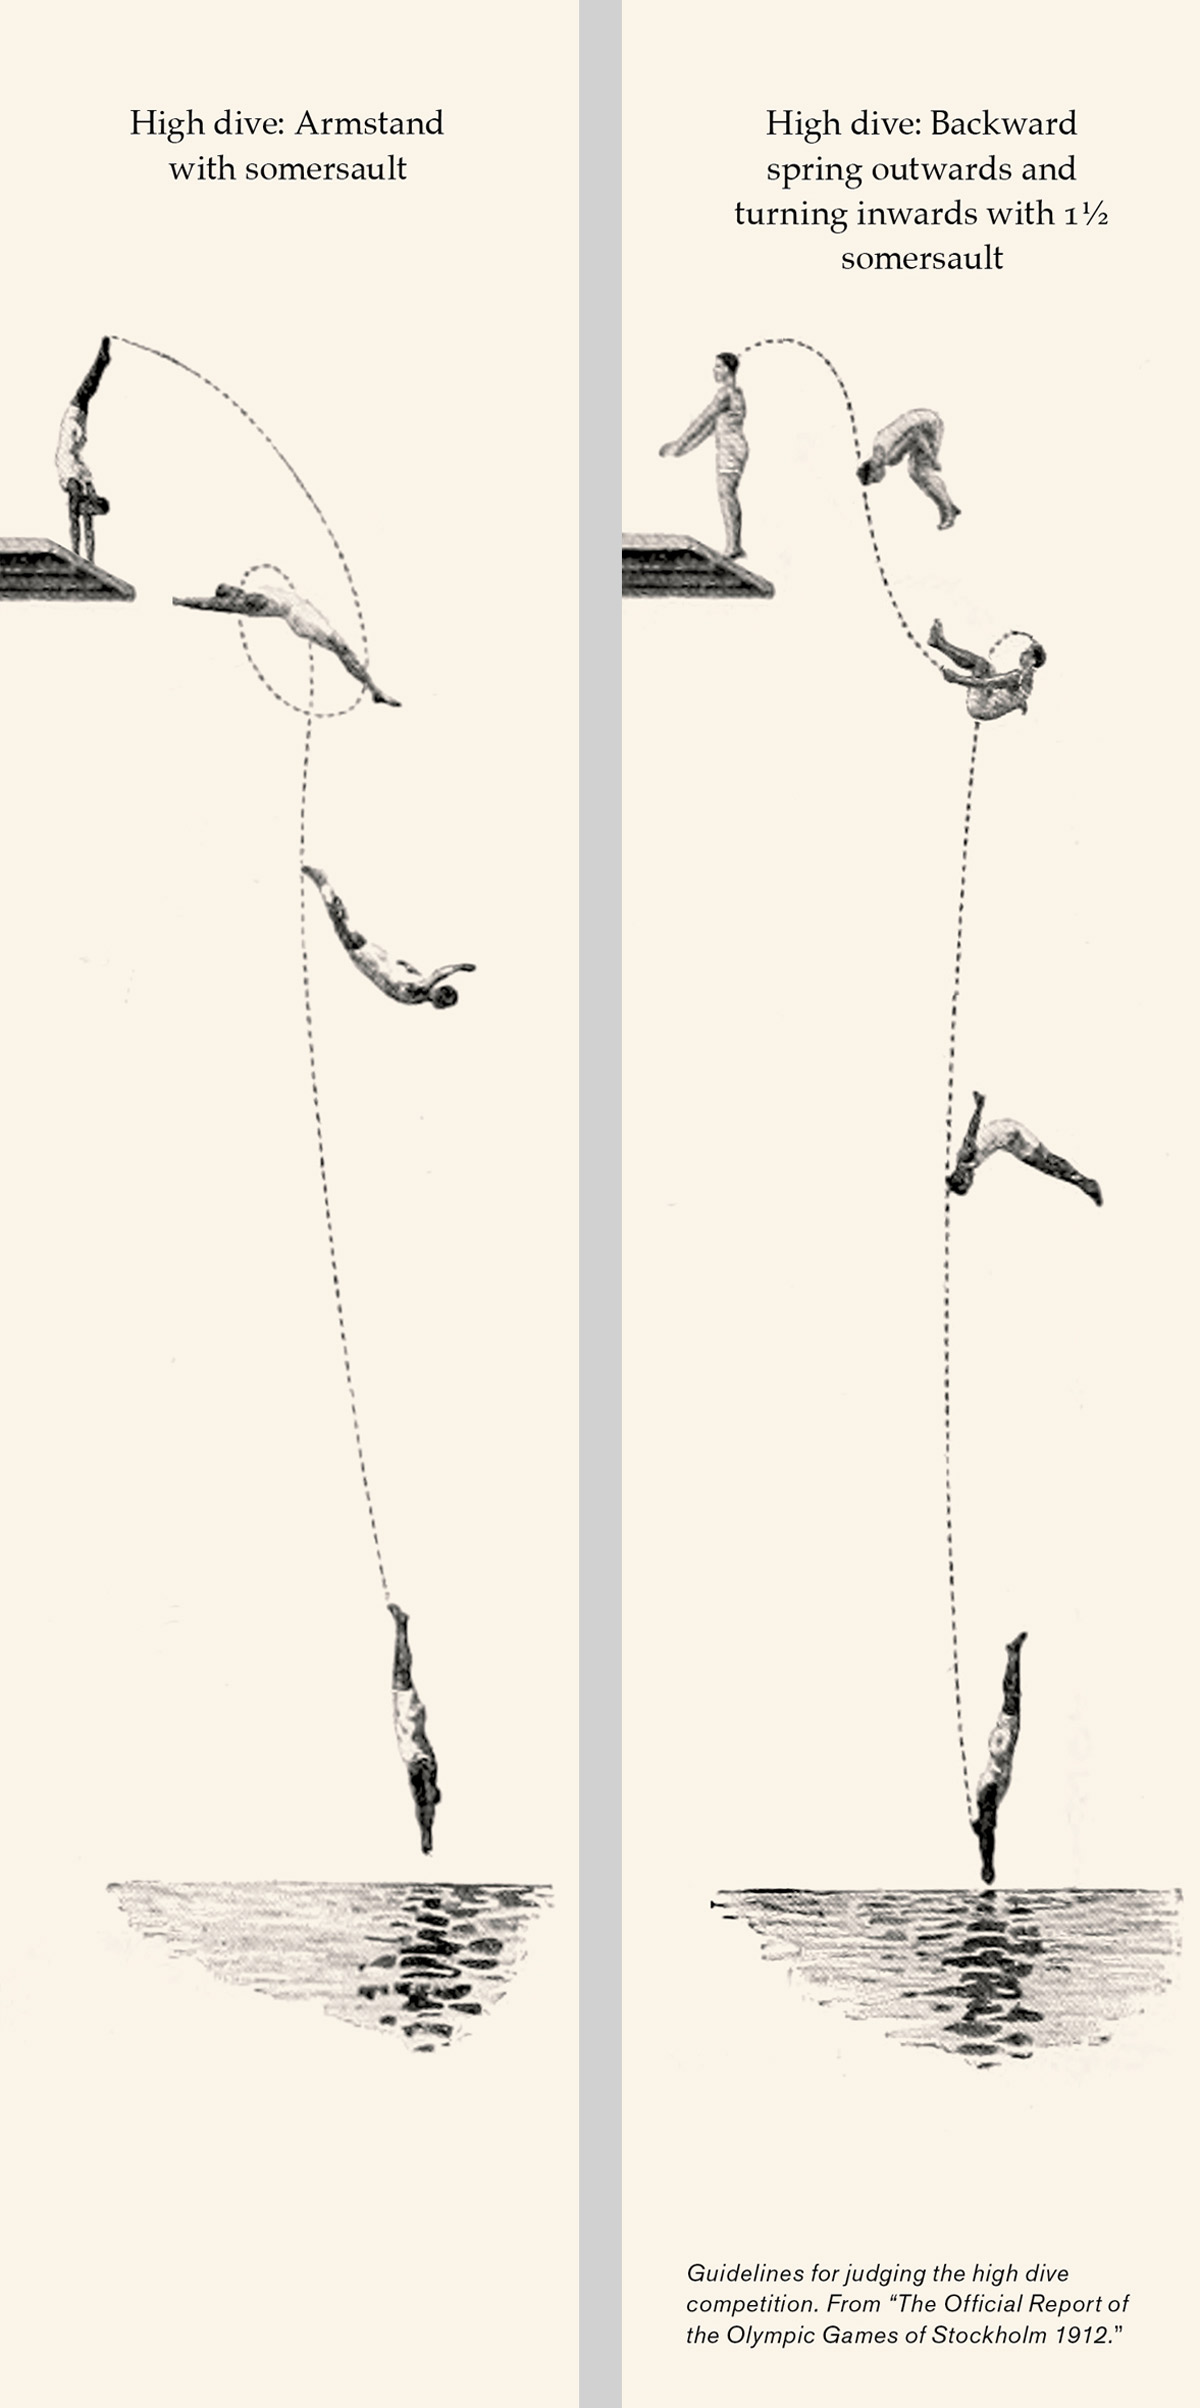 A bookmark depicting an illustration of a diver performing an armstand with somersault off the high dive board. The back of the bookmark depicts an illustration of a diver performing a backward spring outwards and turning inward with a 1 1/2 somersault. A caption reads “Guidelines for judging the high dive competition. From “The official report of the Olympic Games of Stockholm nineteen twelve”.”